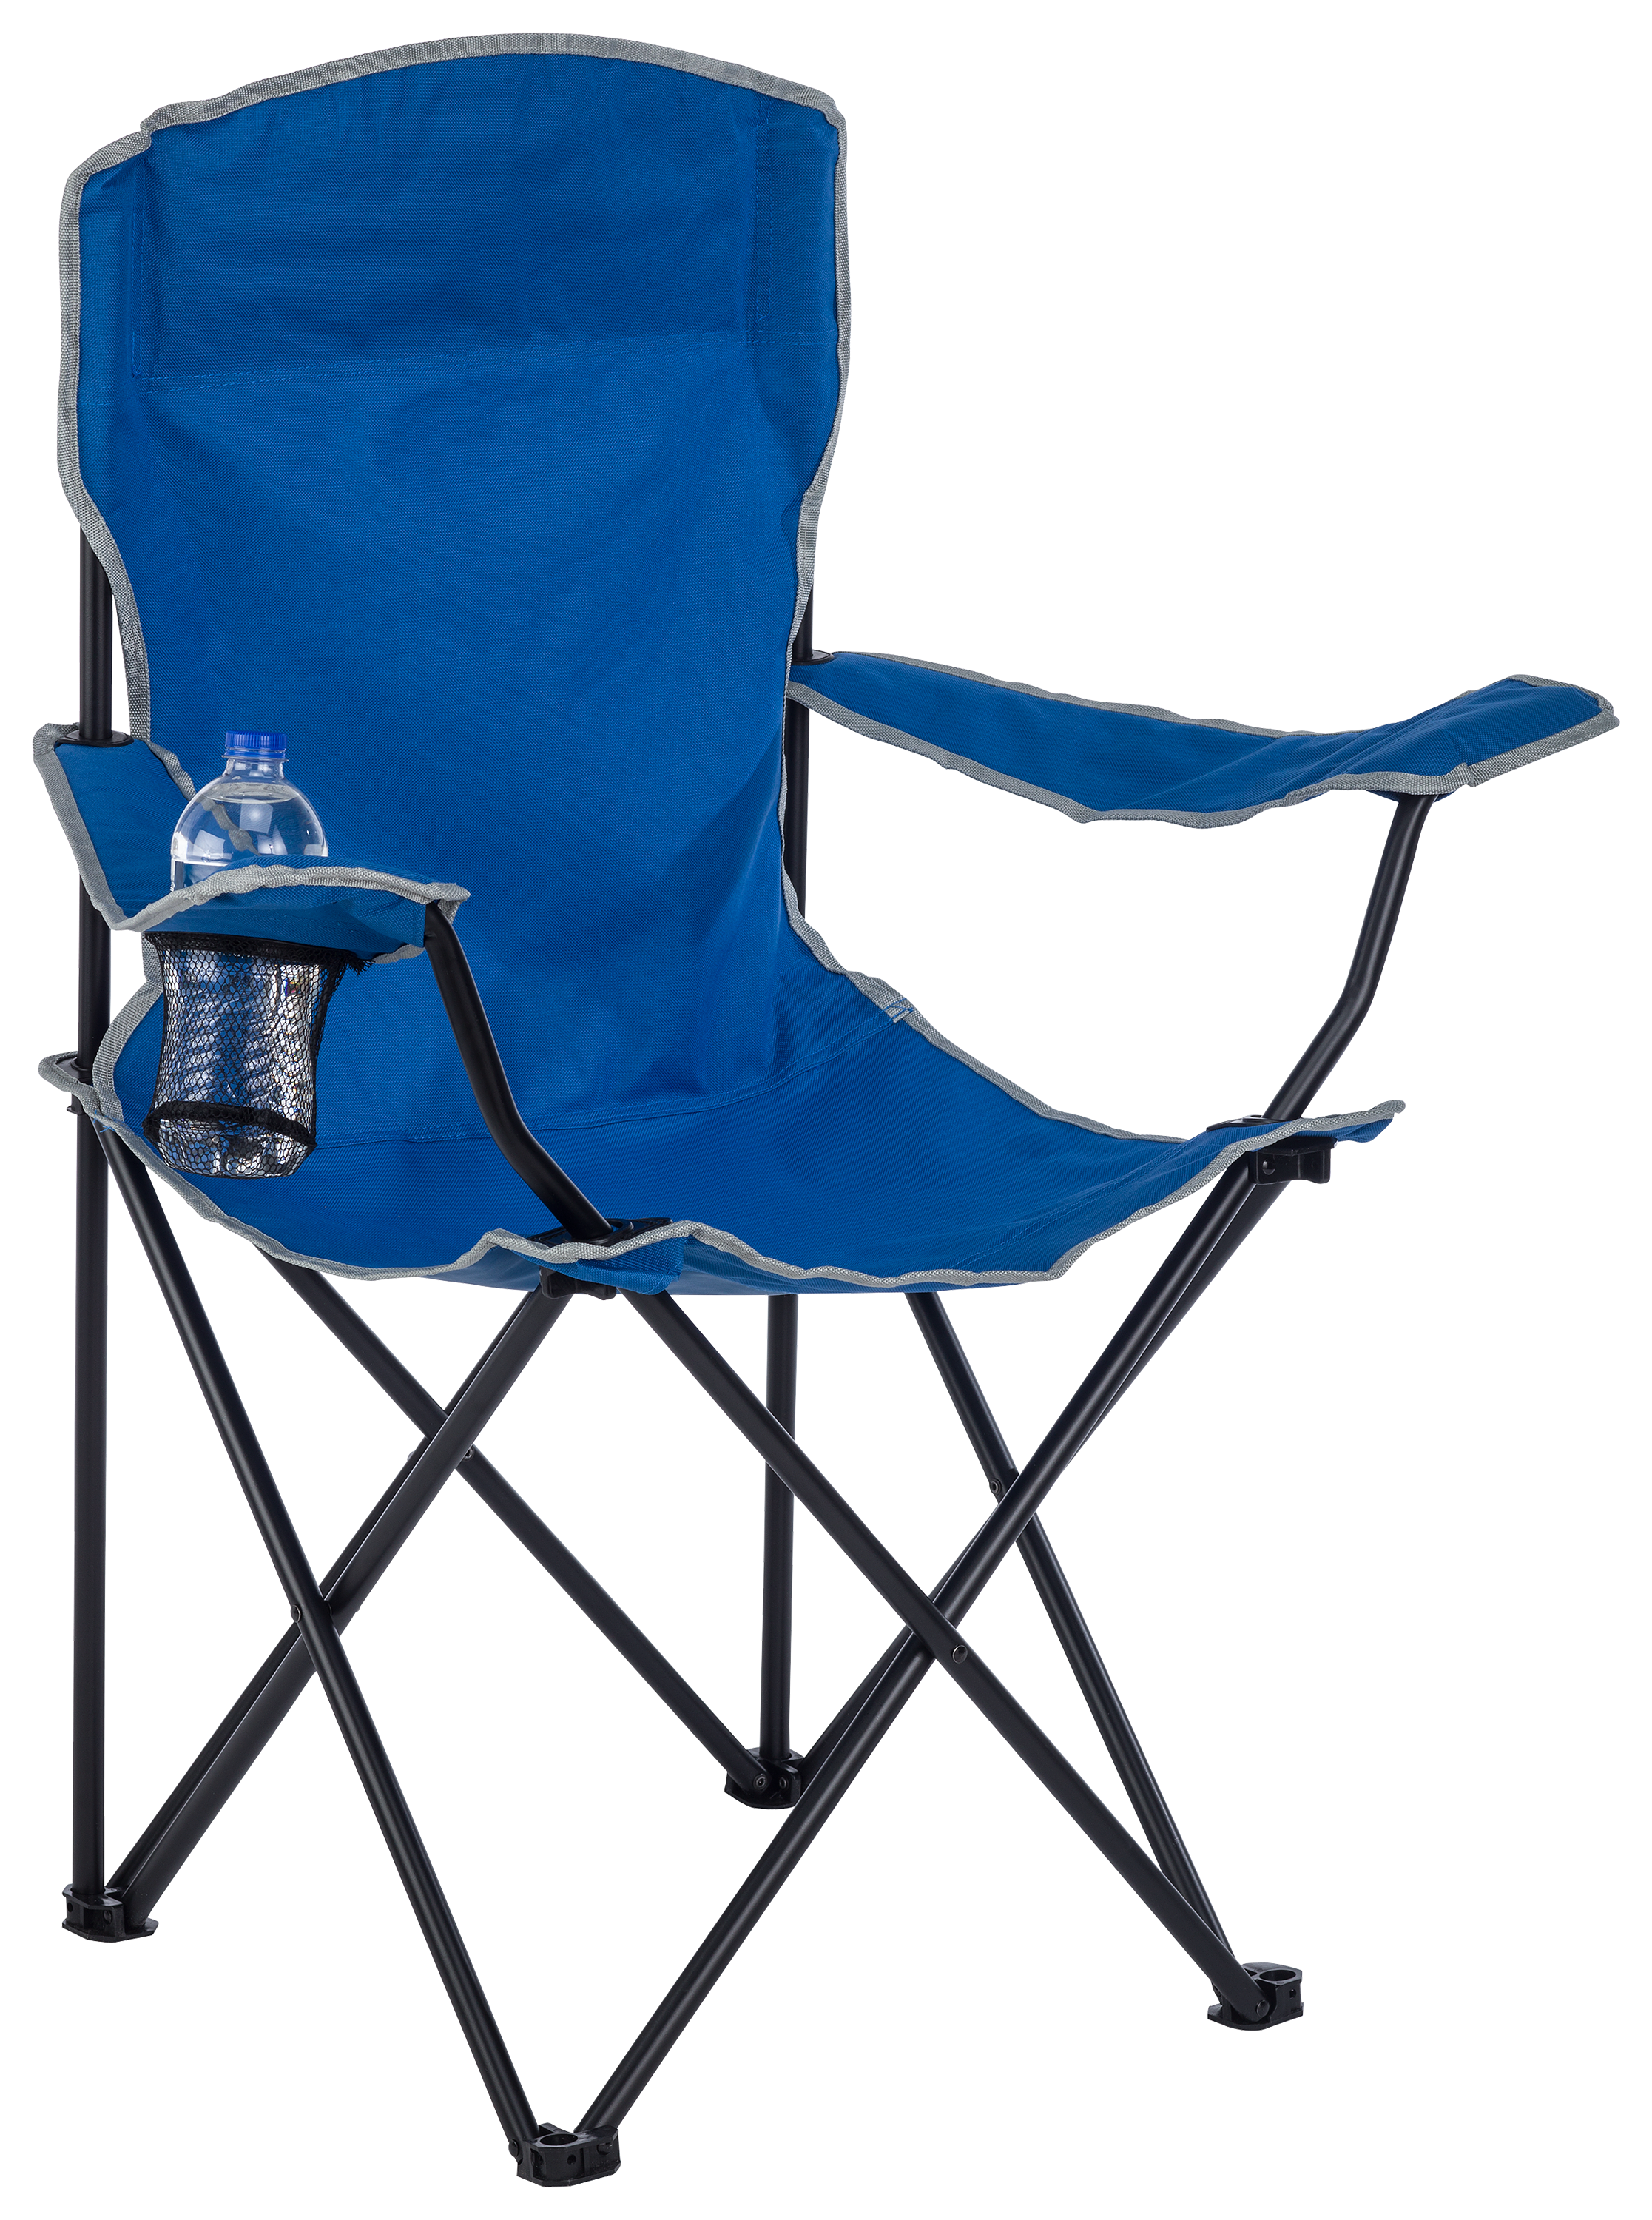 Combo with Collapsible Chair, Rod Holder, Carry Bag for Boys and